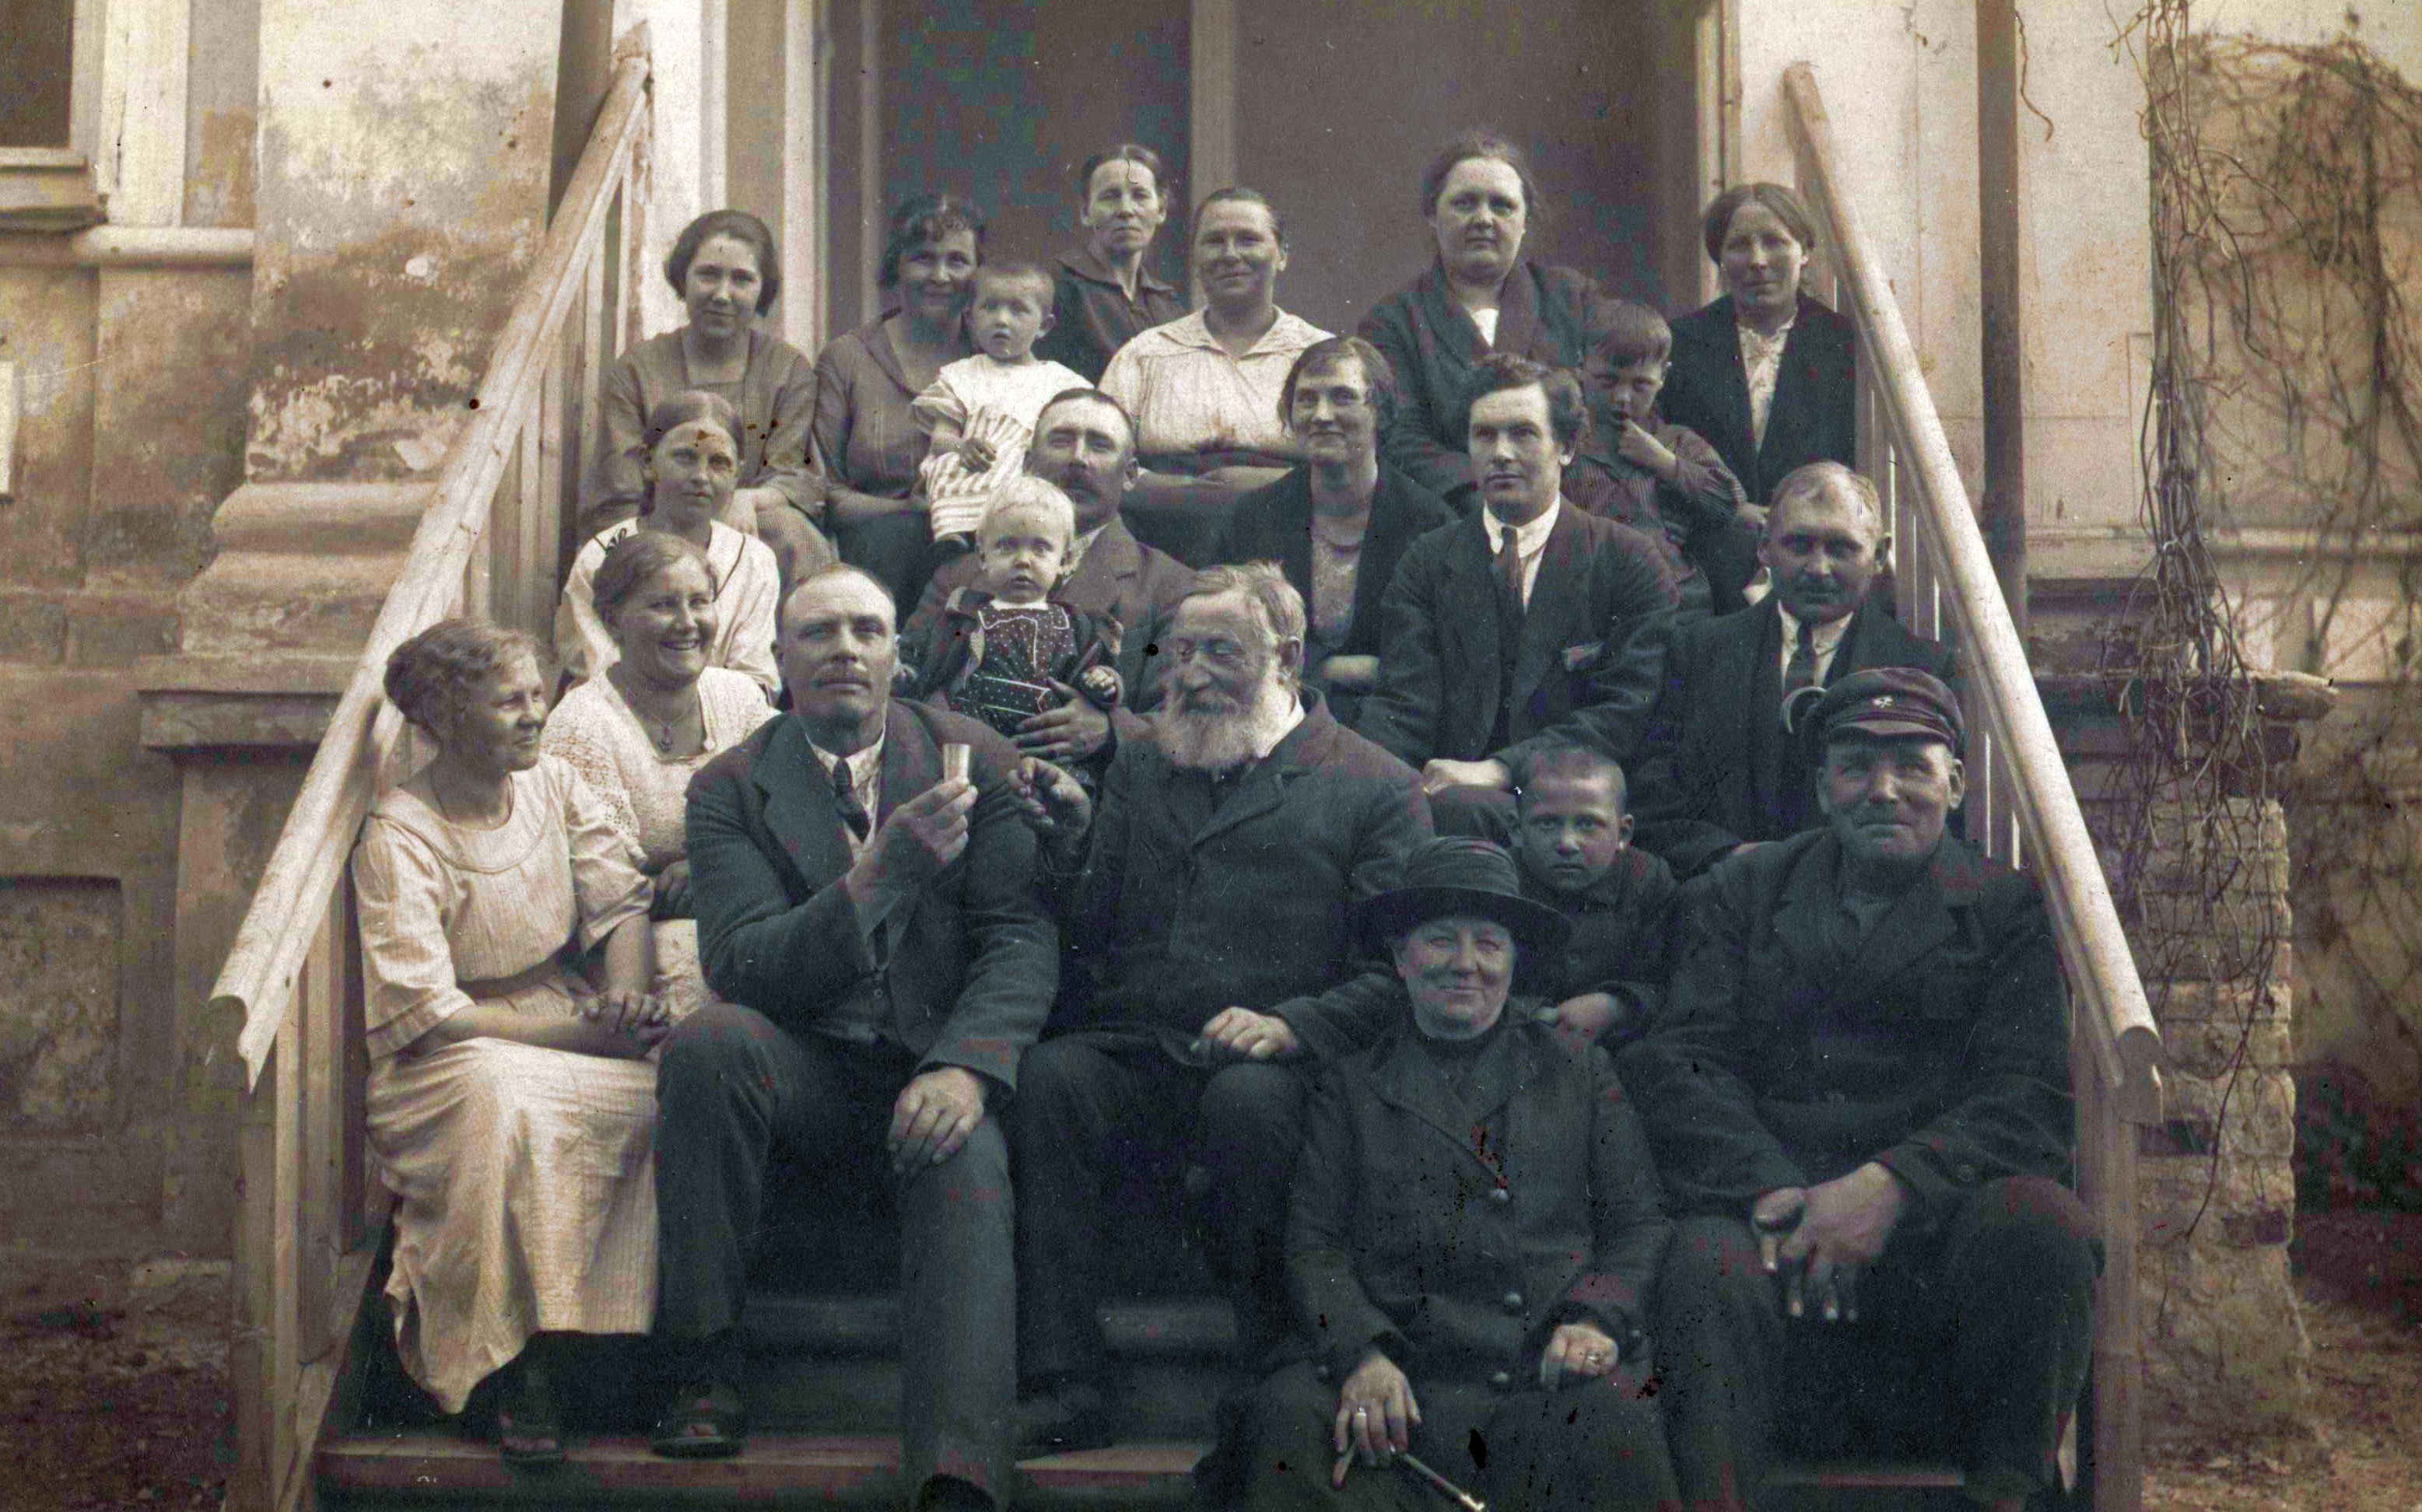 Company at the end of Kaagvere Manor ca 1930s